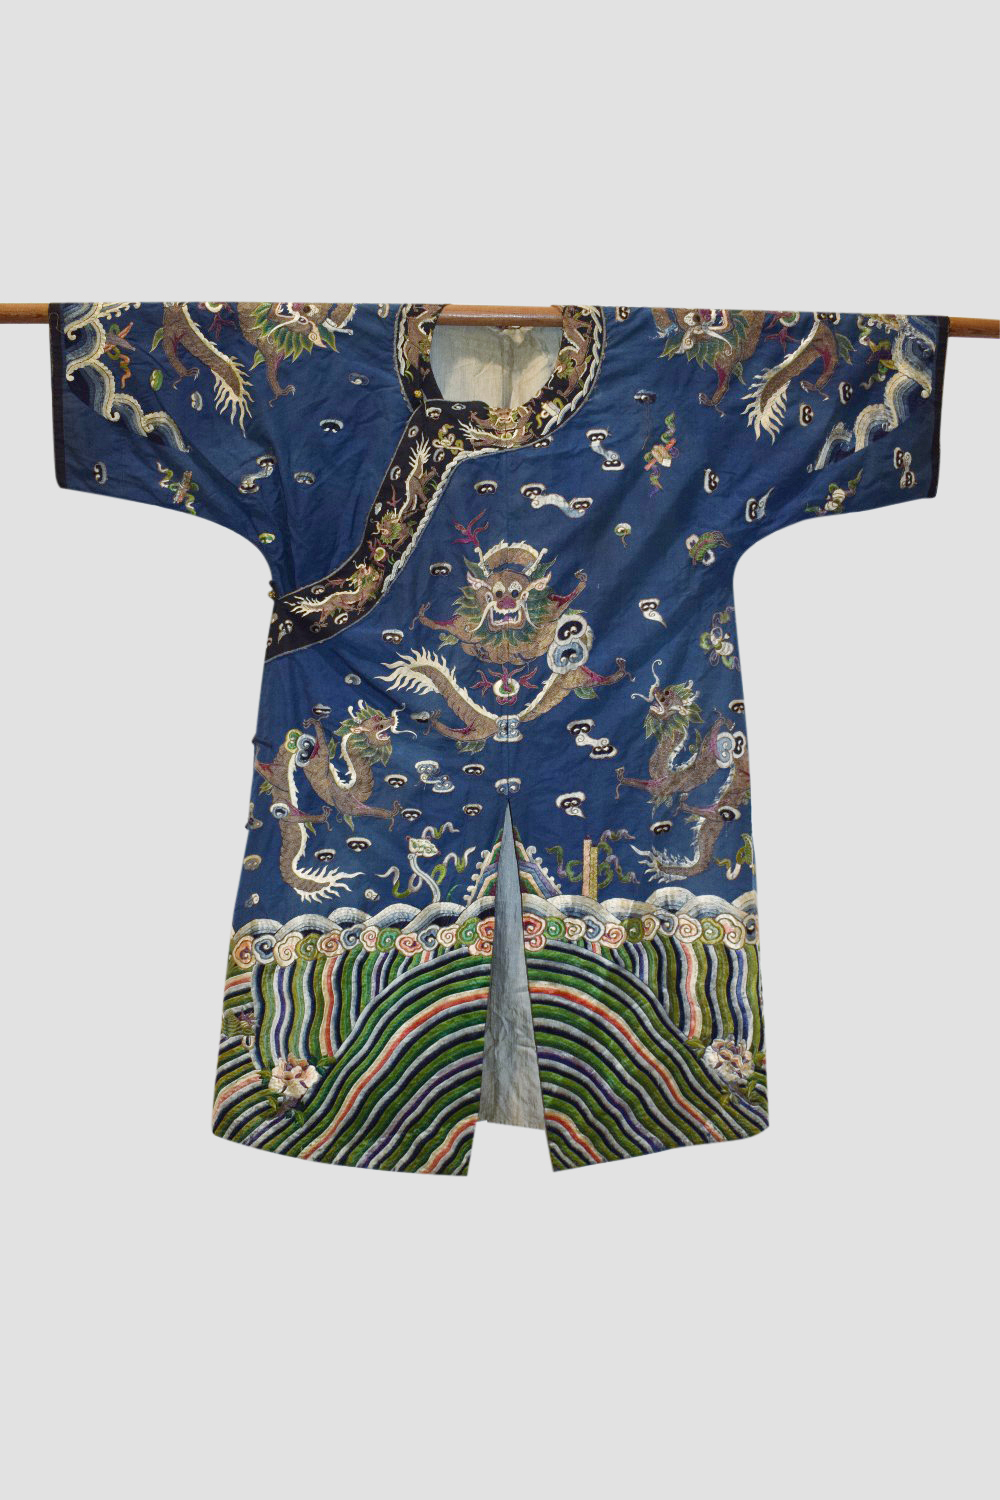 Fine Chinese blue silk dragon robe, late 19th/early 20th century, the four-clawed dragons above a